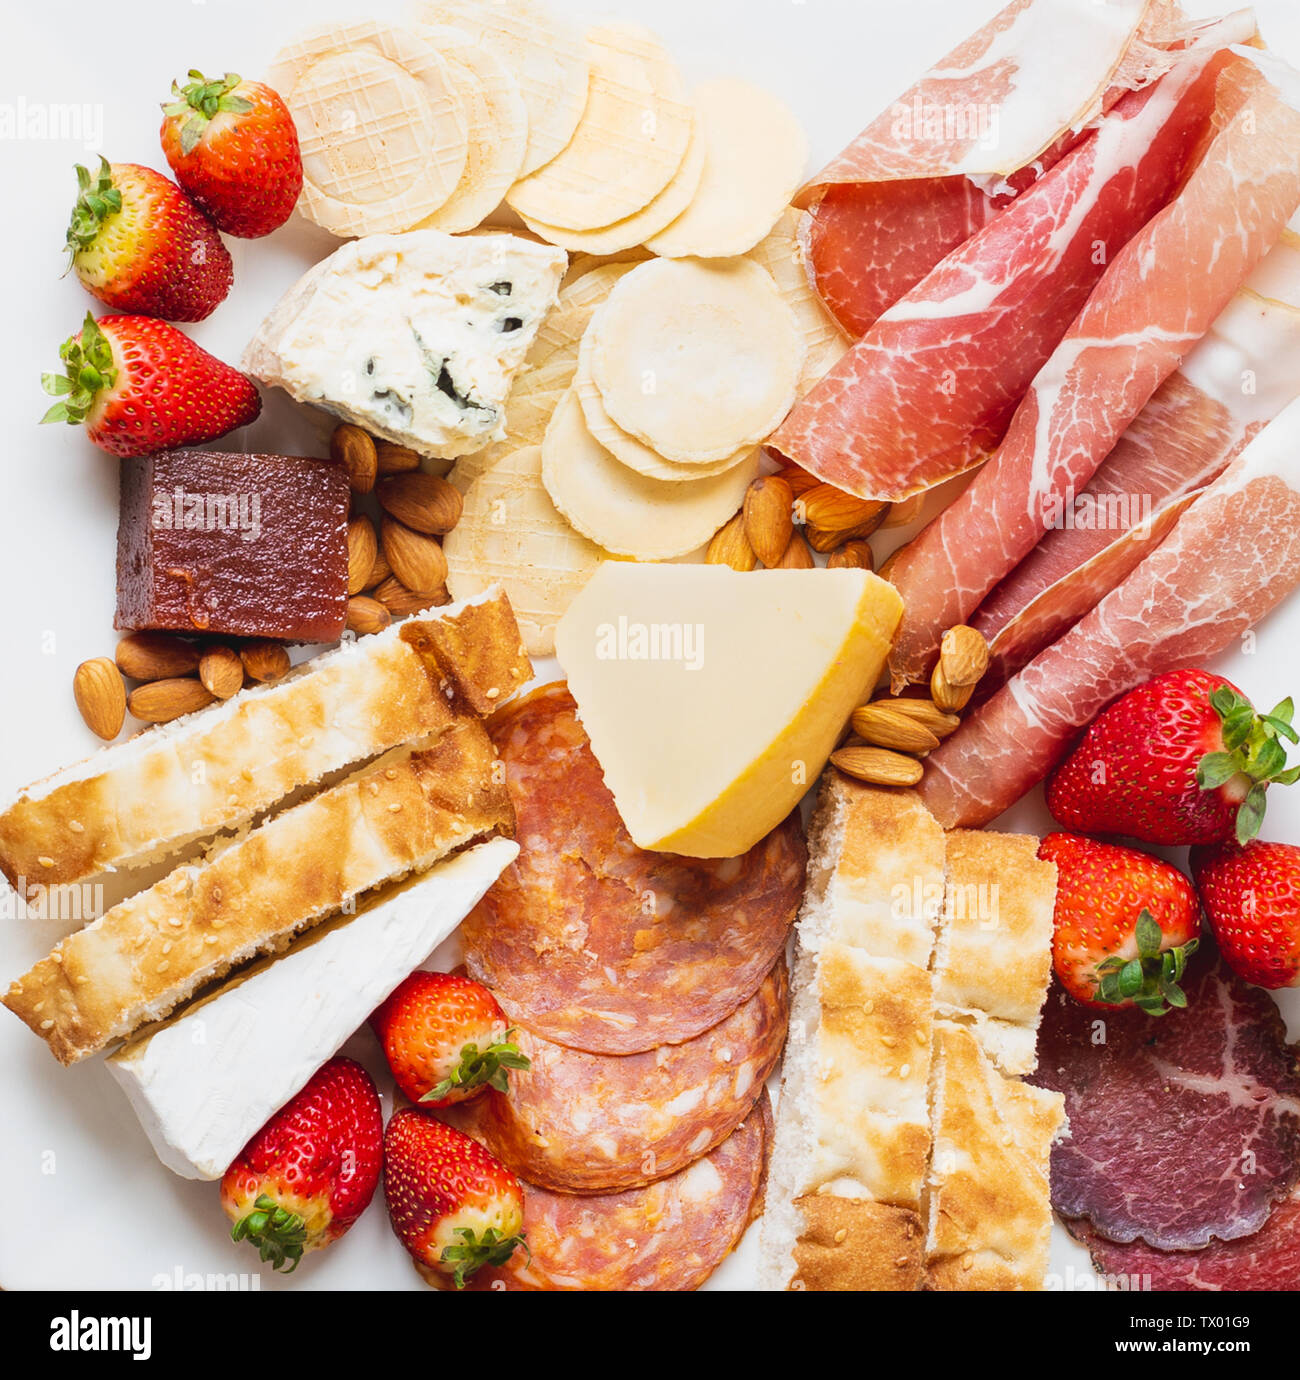 Overhead image of an antipasto platter with a mixture of cold meats, strawberries, cheese, crackers and bread Stock Photo